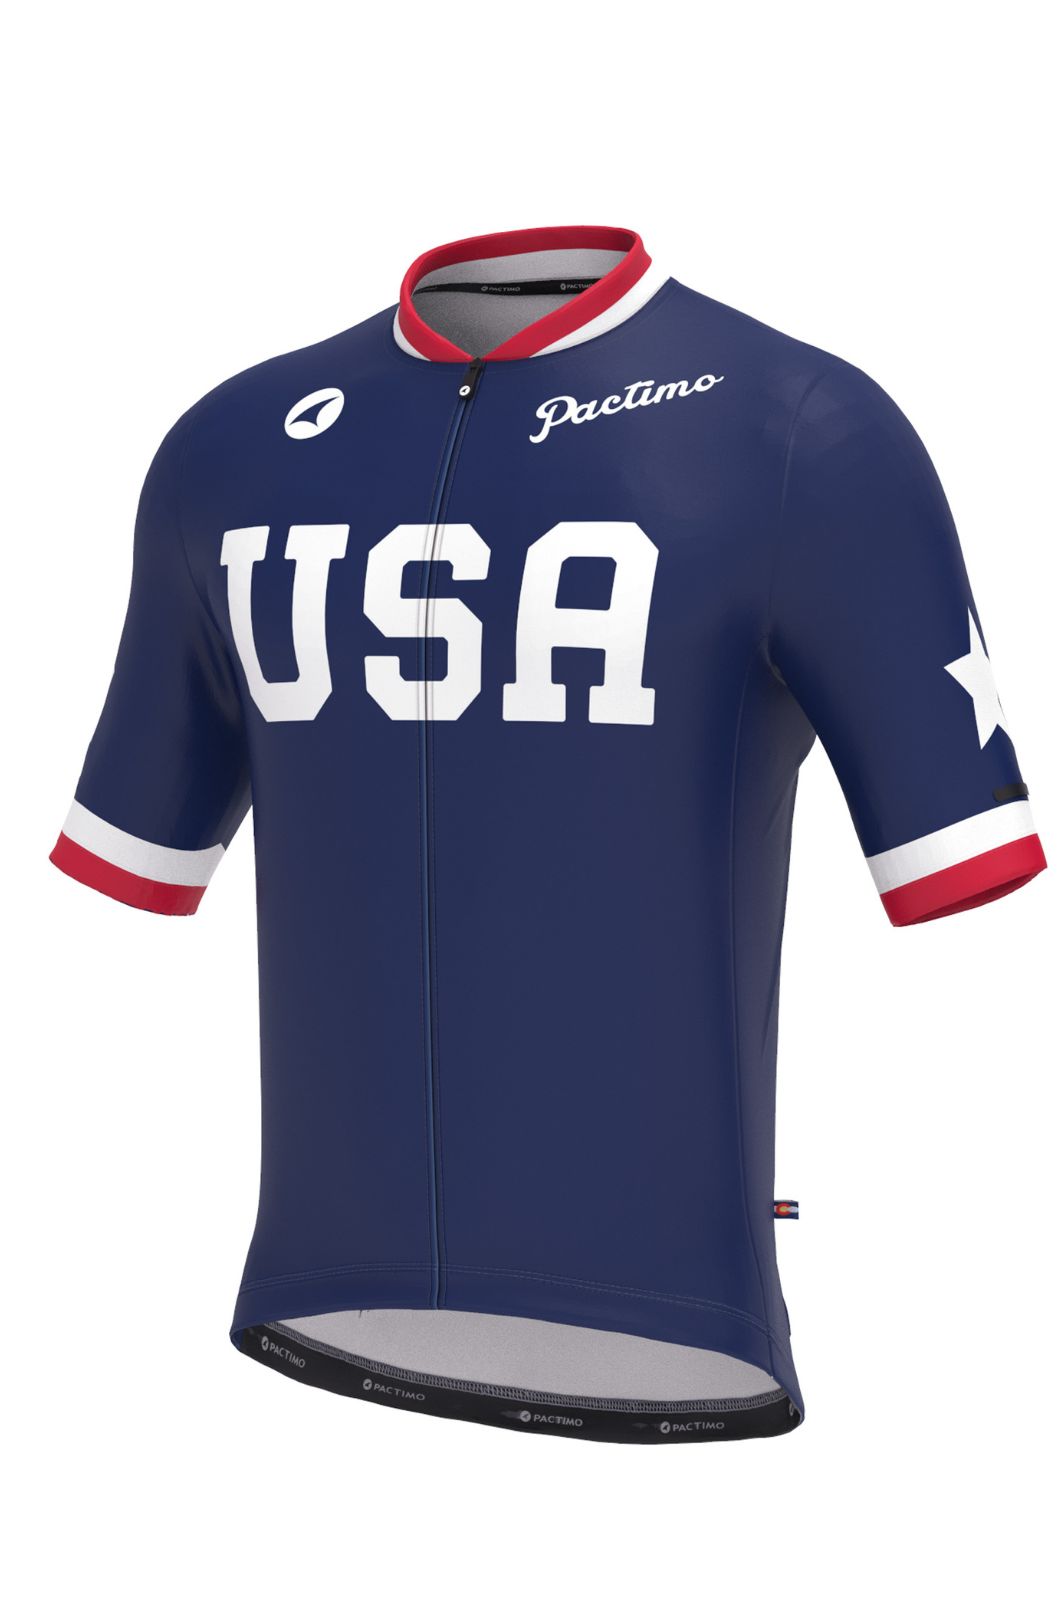 Mens USA Cycling Jersey Olympic Retro Aero Fit Pactimo